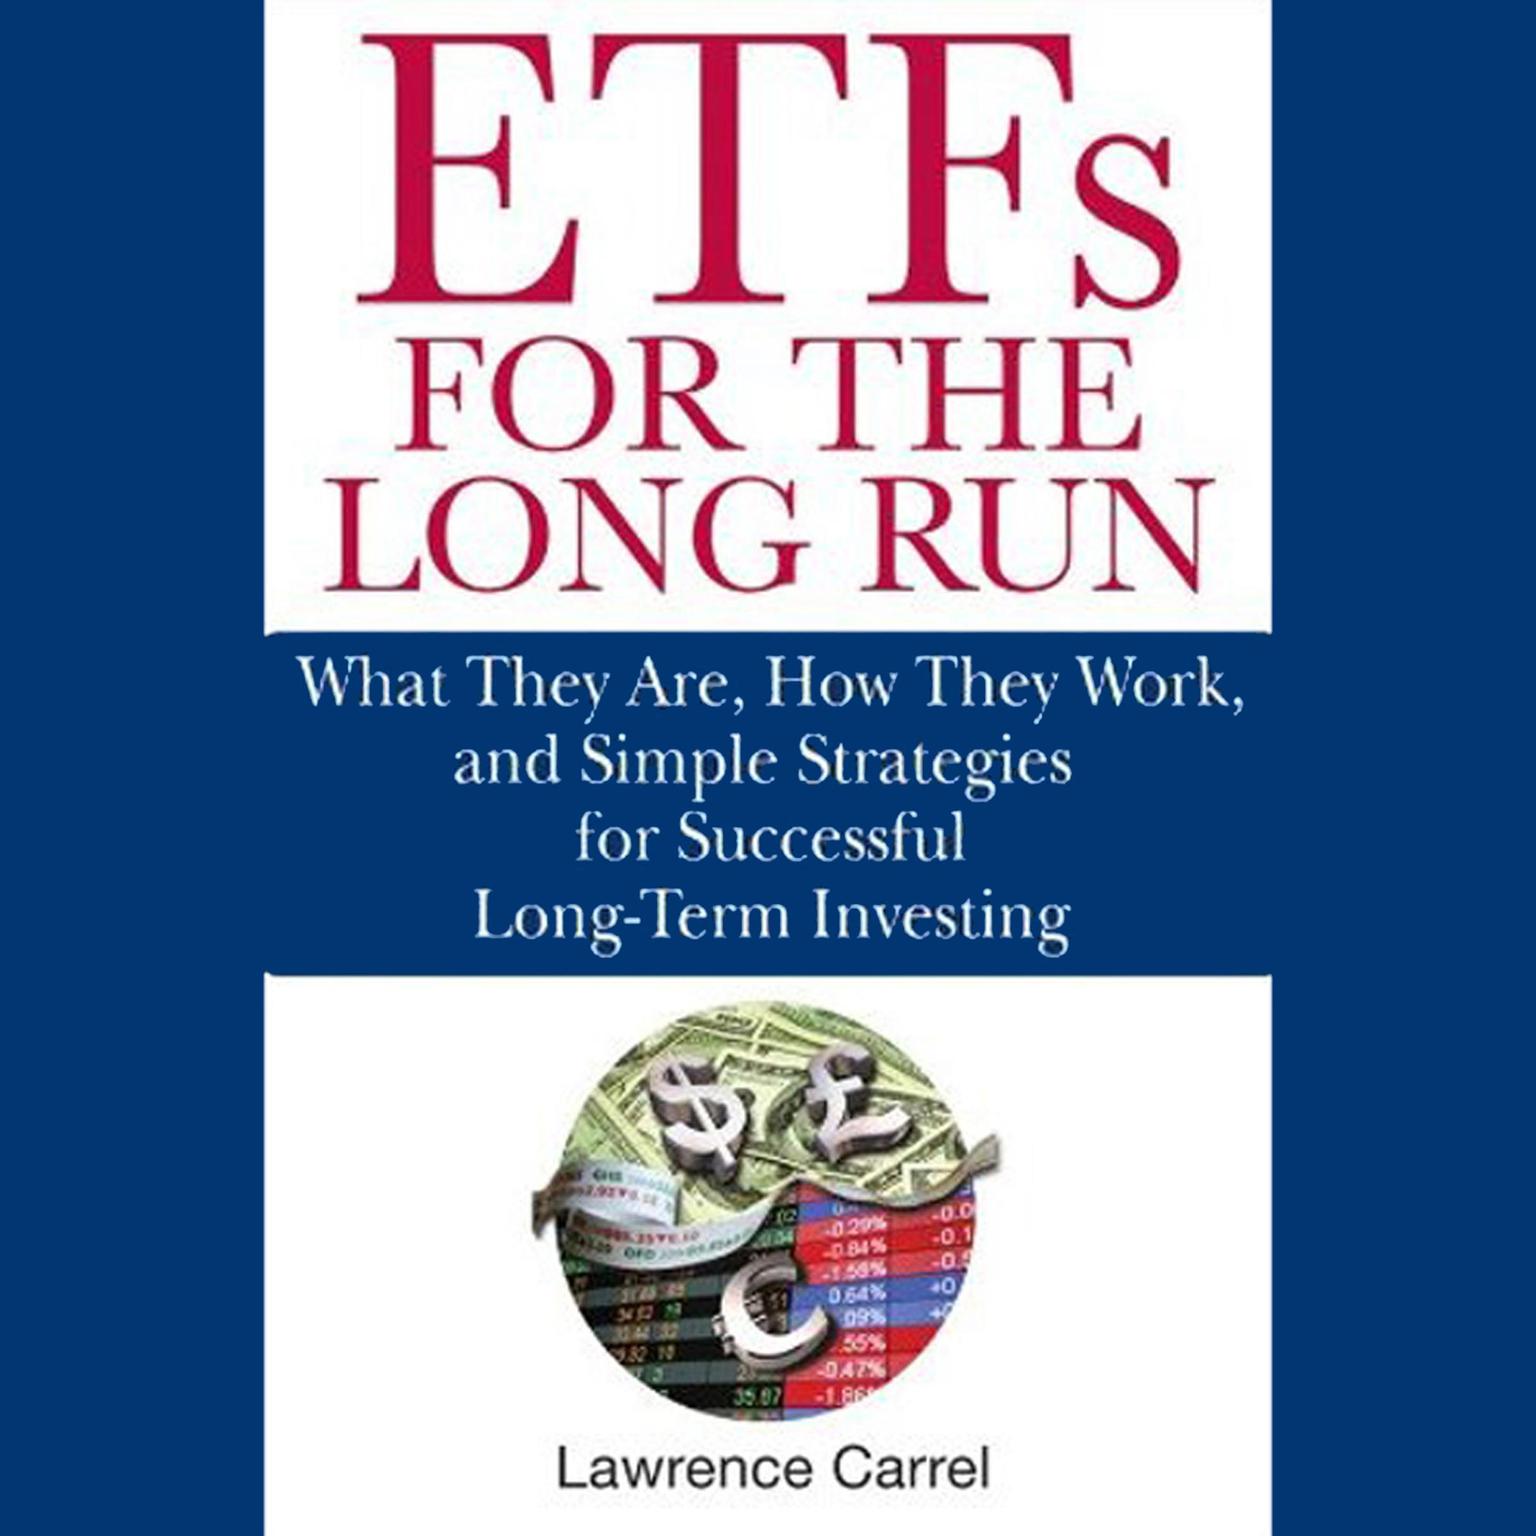 ETFs for the Long Run: What They Are, How They Work, and Simple Strategies for Successful Long-Term Investing  Audiobook, by Lawrence Carrel